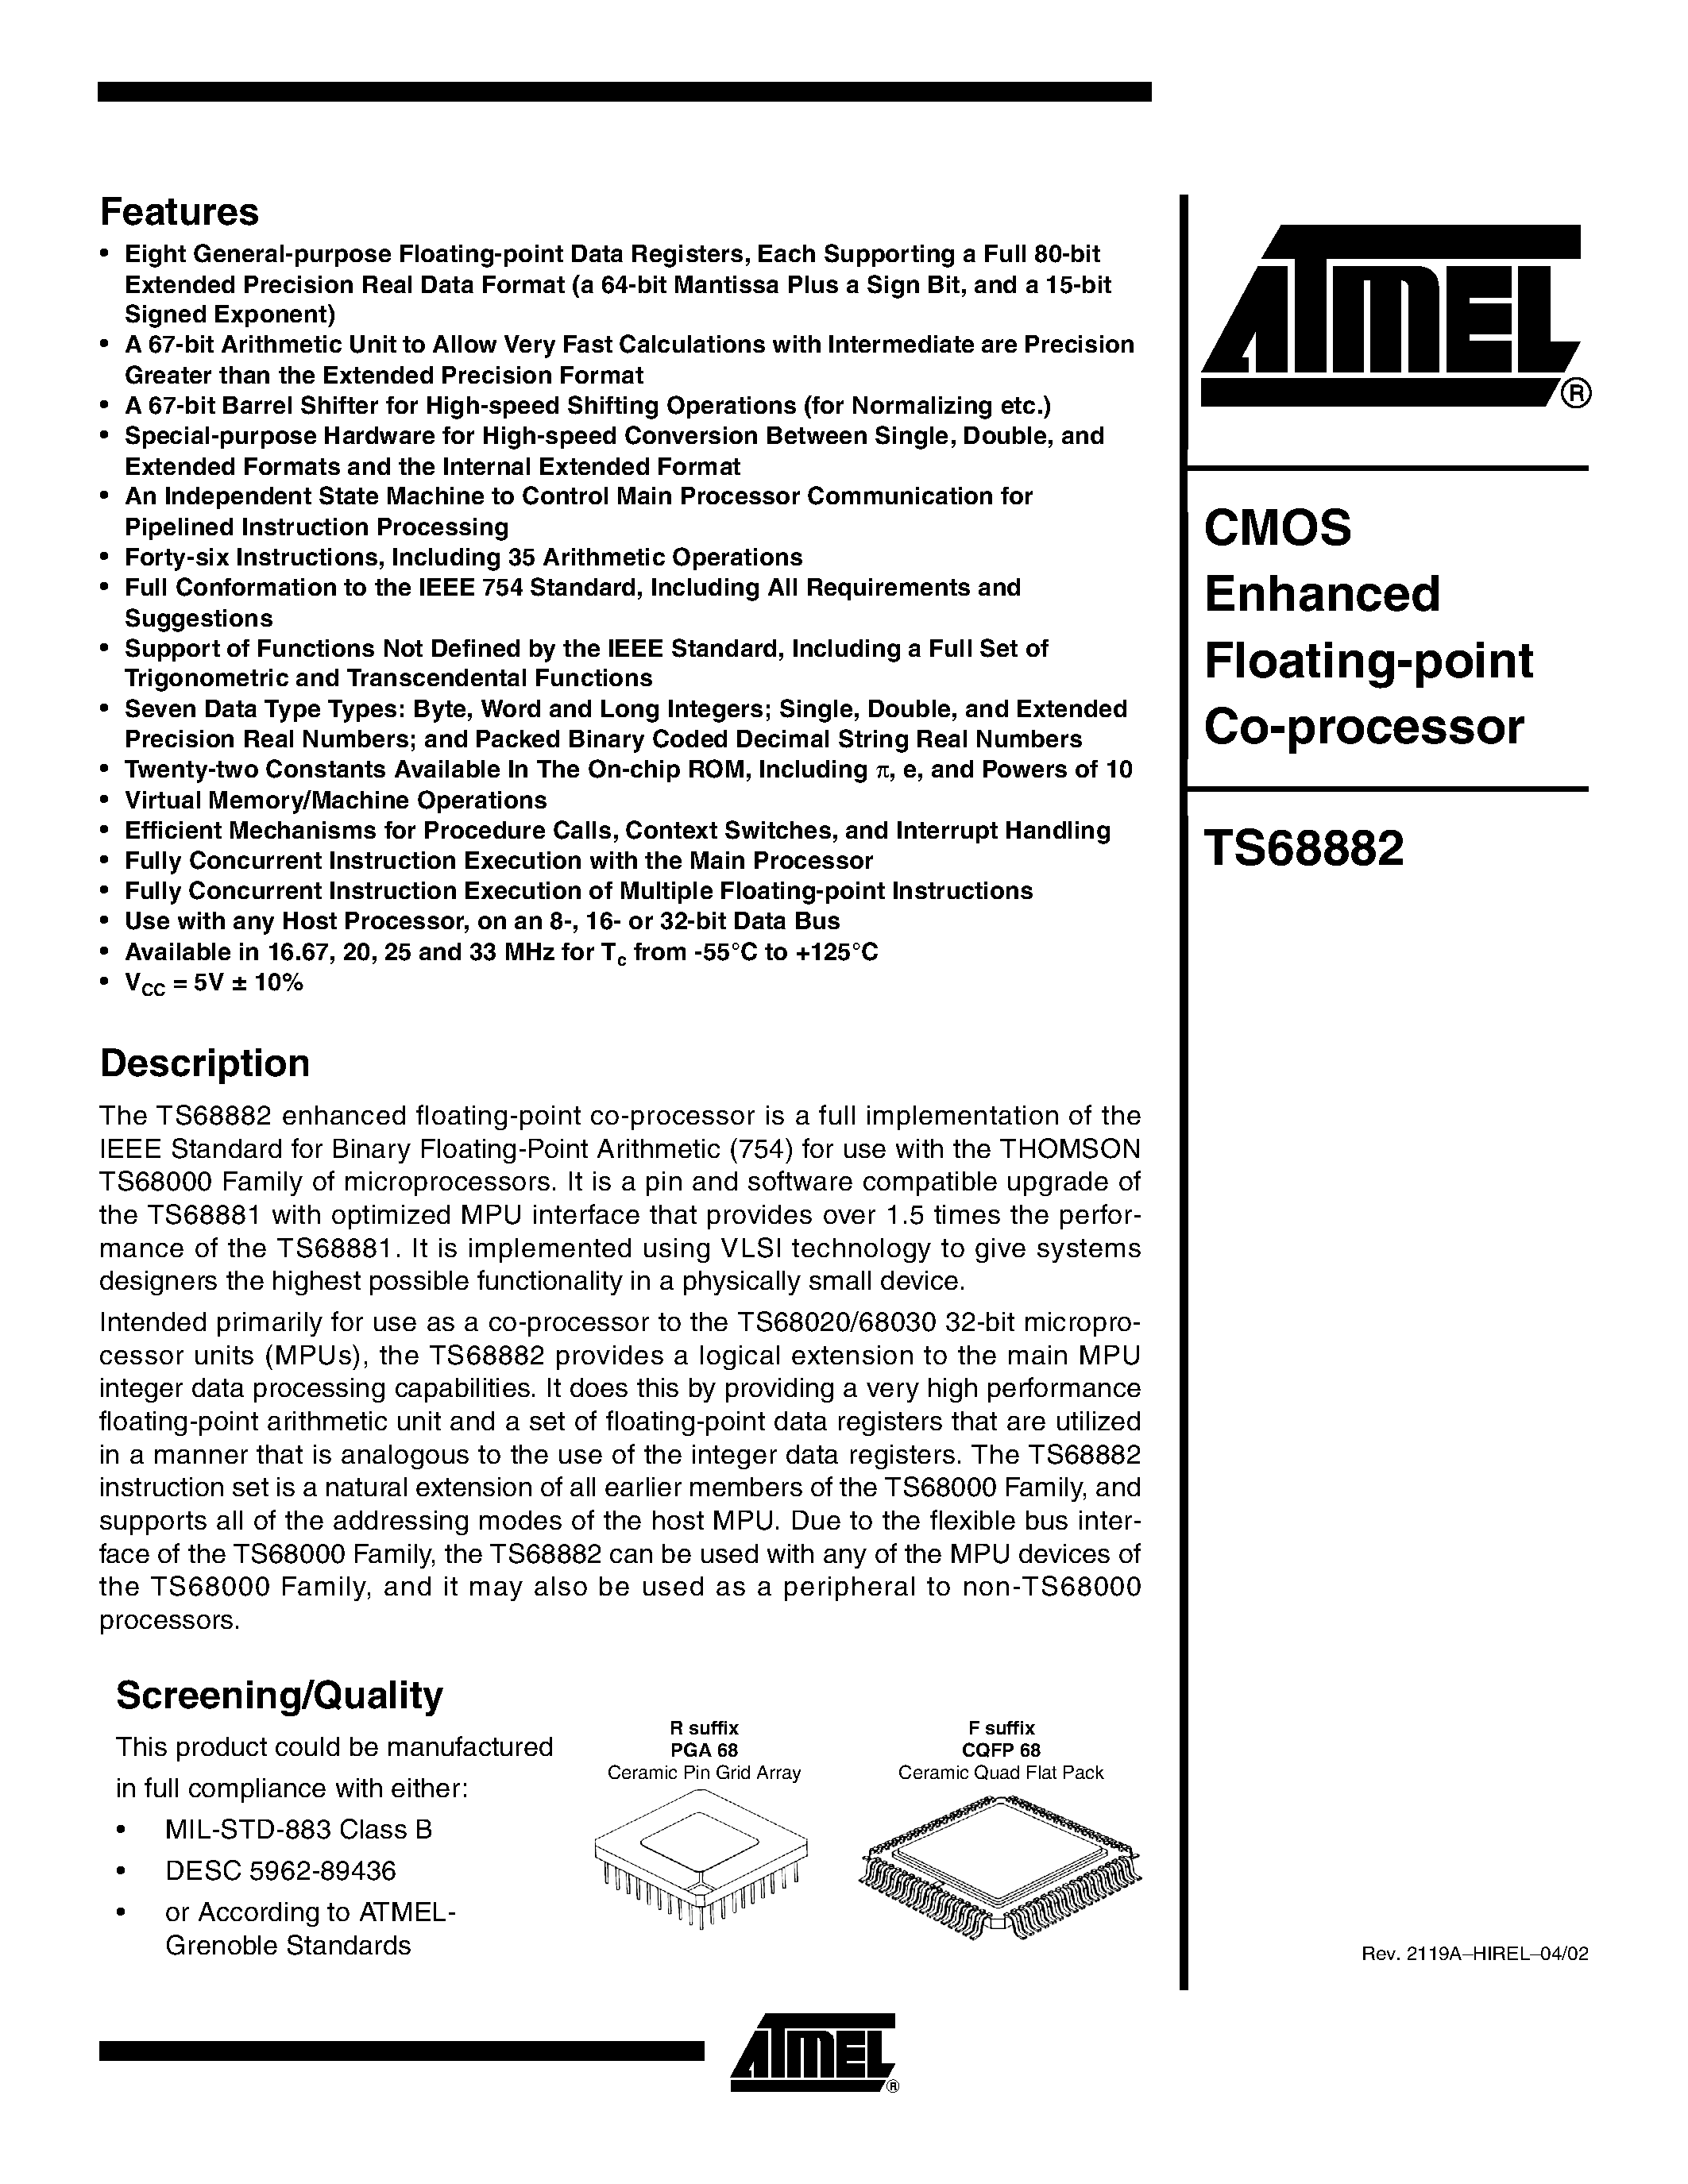 Datasheet TS68882VF25 - CMOS Enhanced Floating-point Co-processor page 1